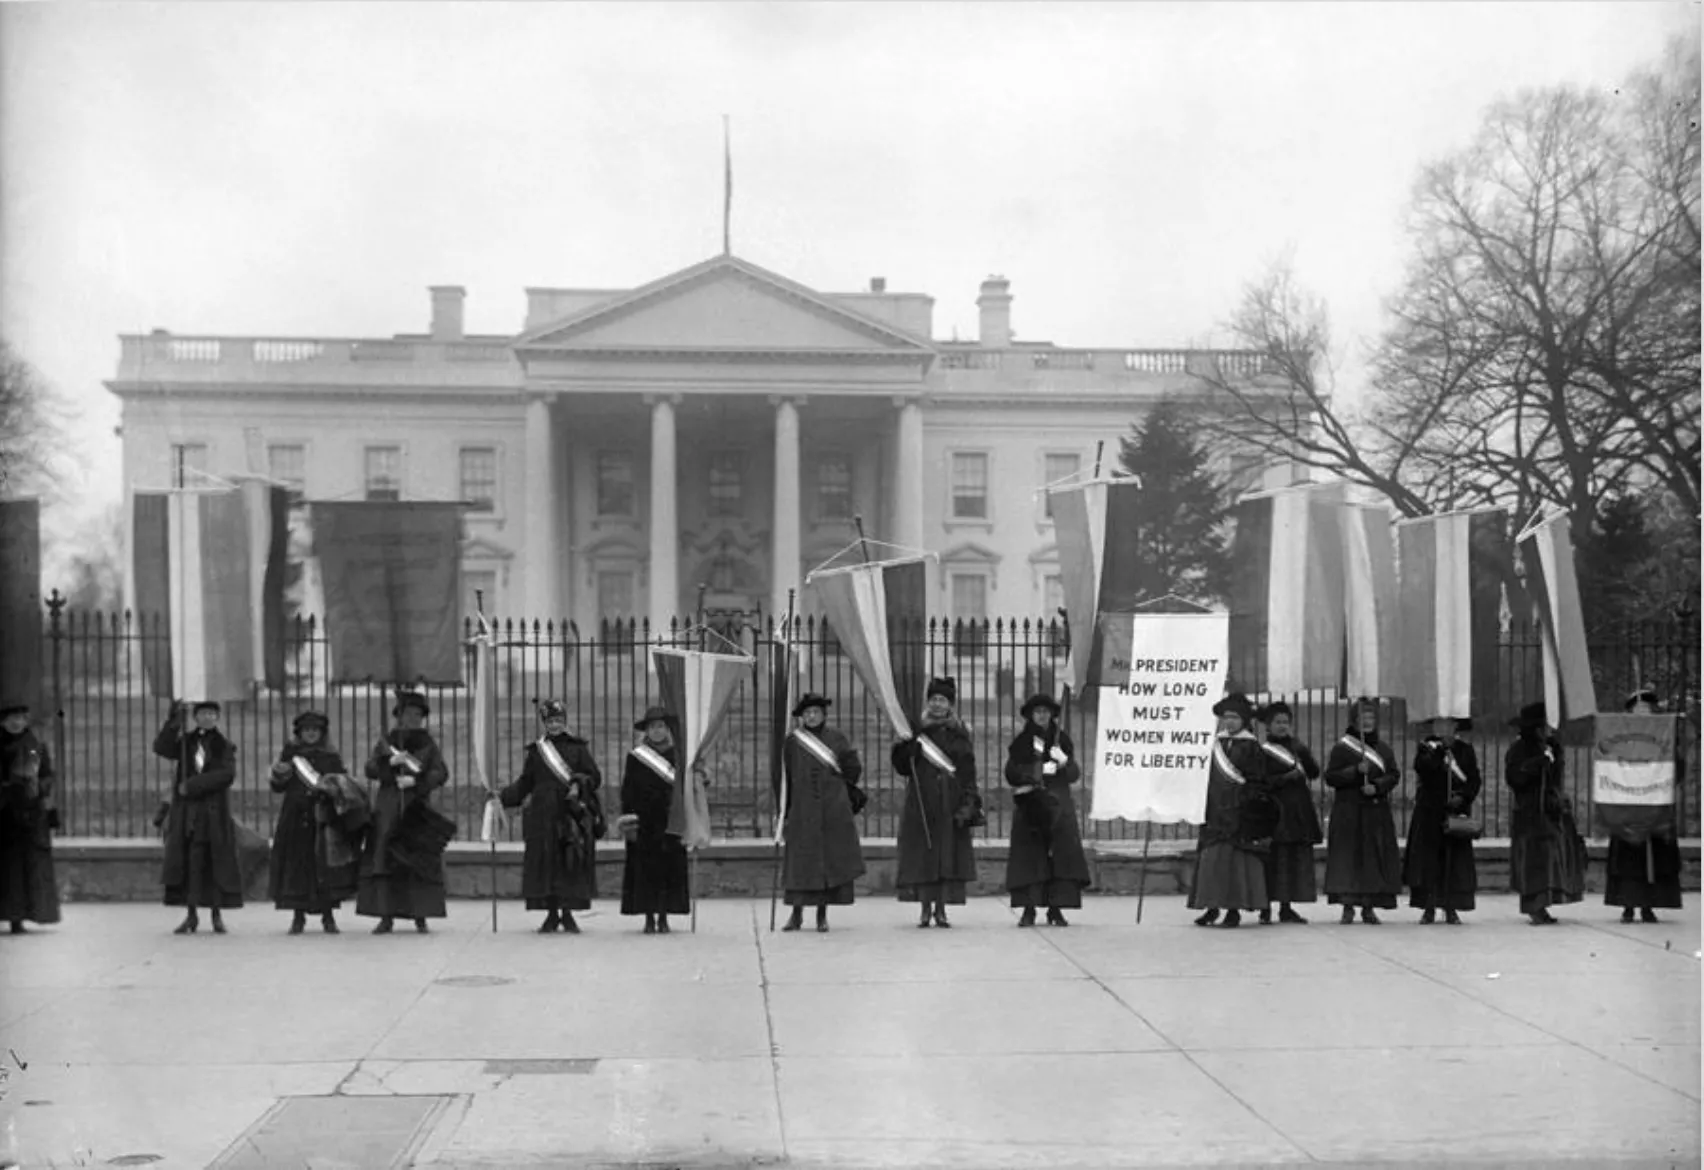 Women Suffragists Outside the White House